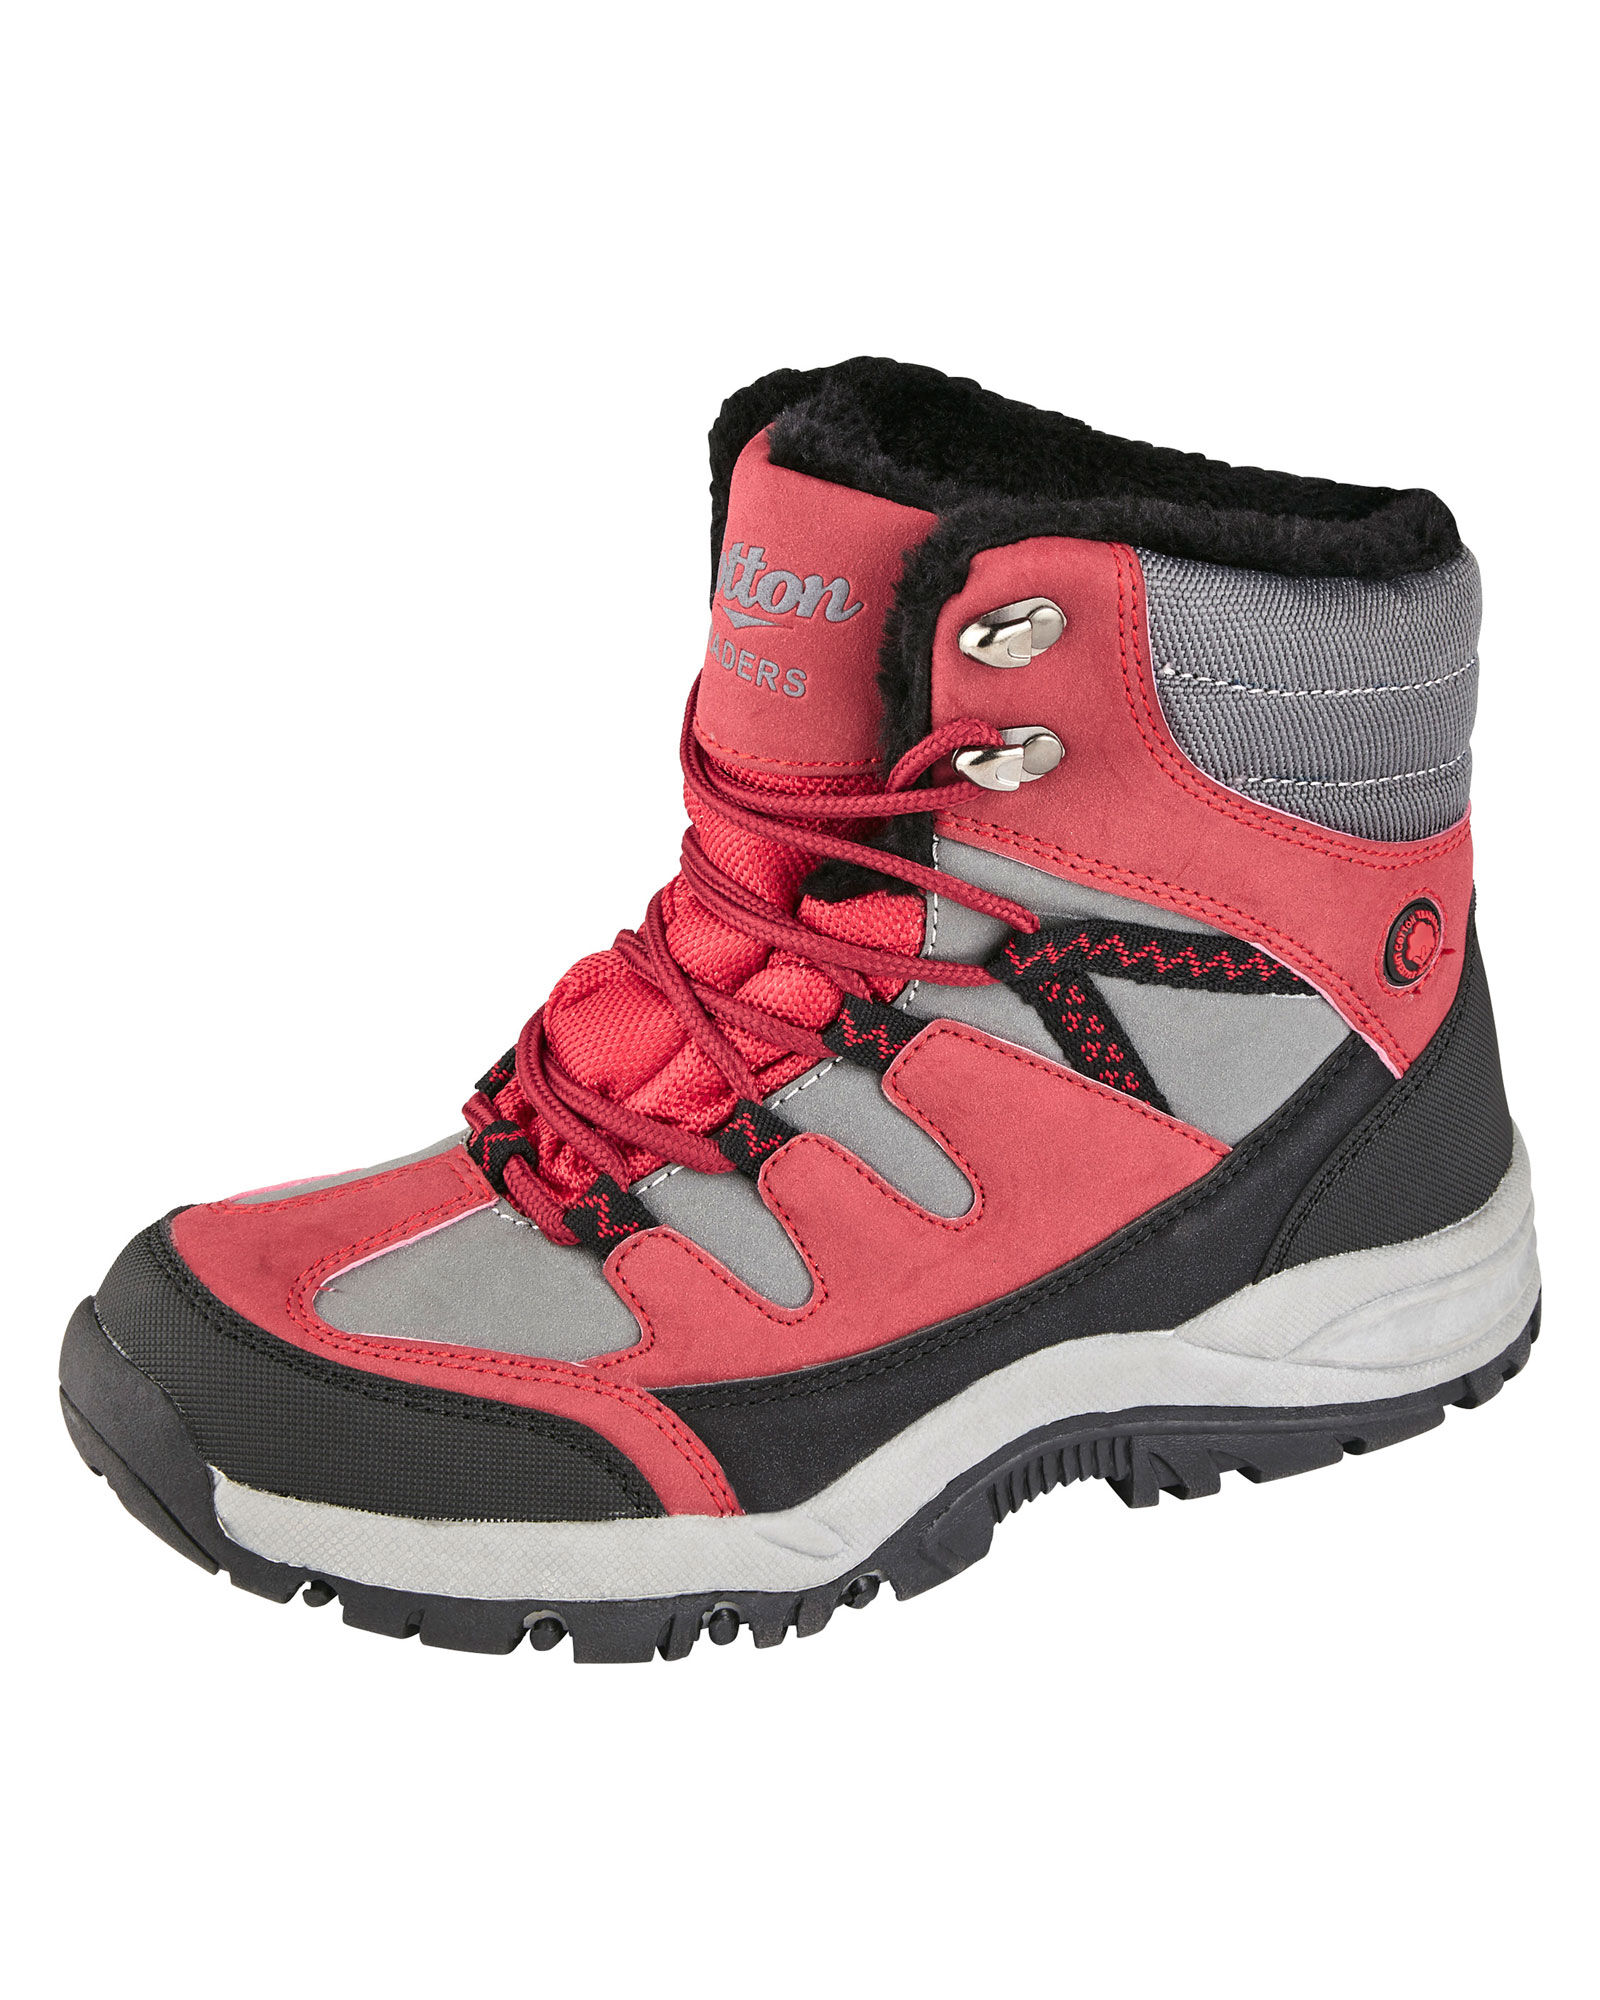 Waterproof Snow Boots at Cotton Traders